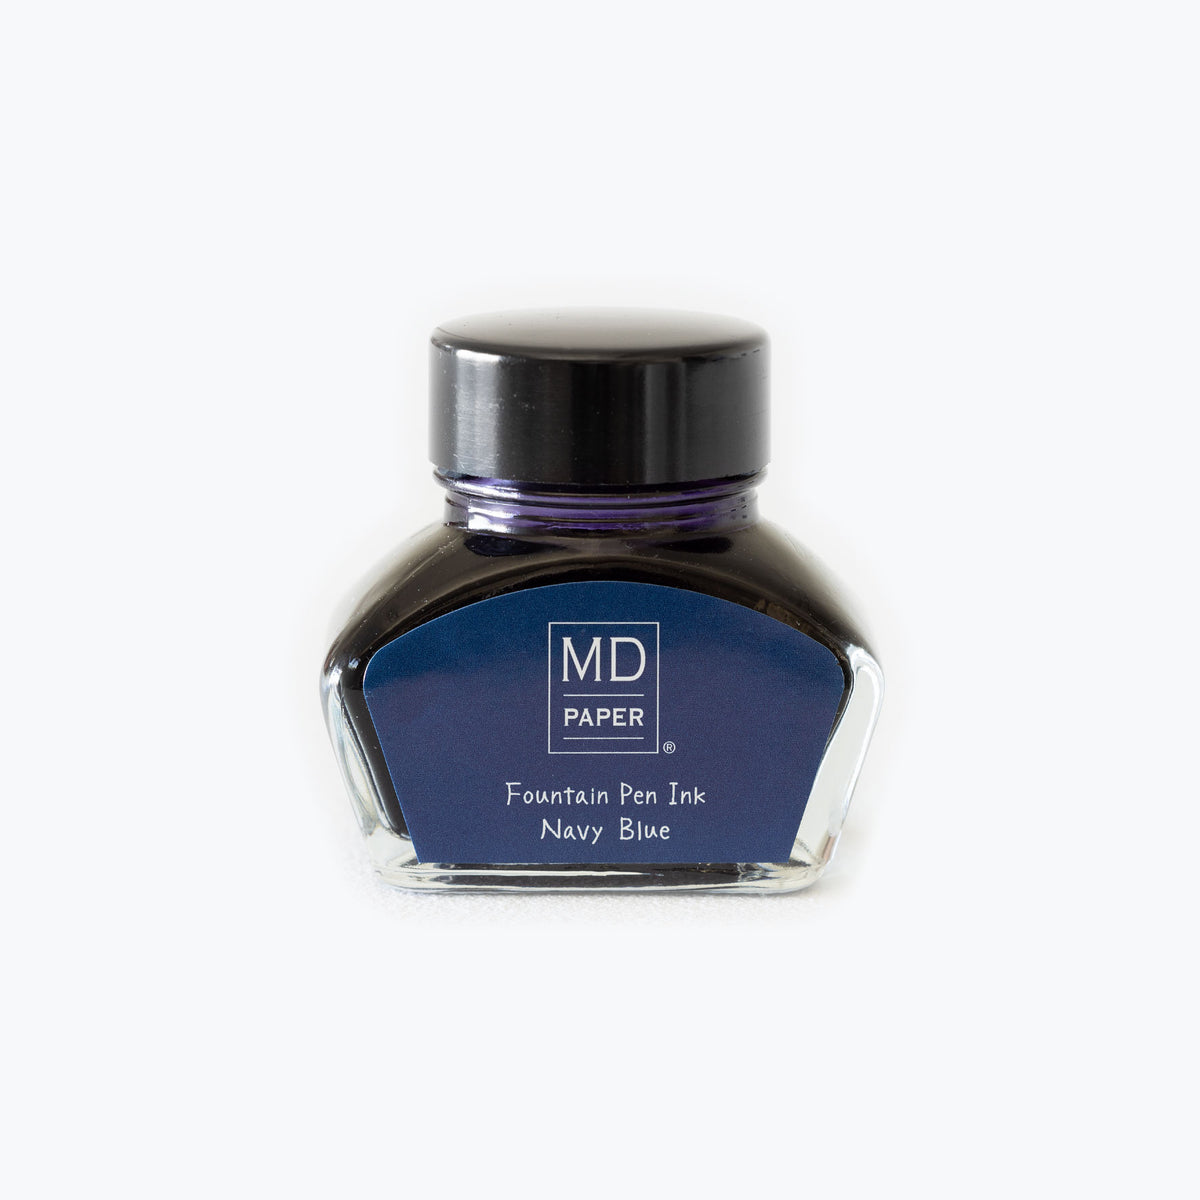 Midori - Fountain Pen Ink - MD 15th Anniversary - Navy Blue <Outgoing>